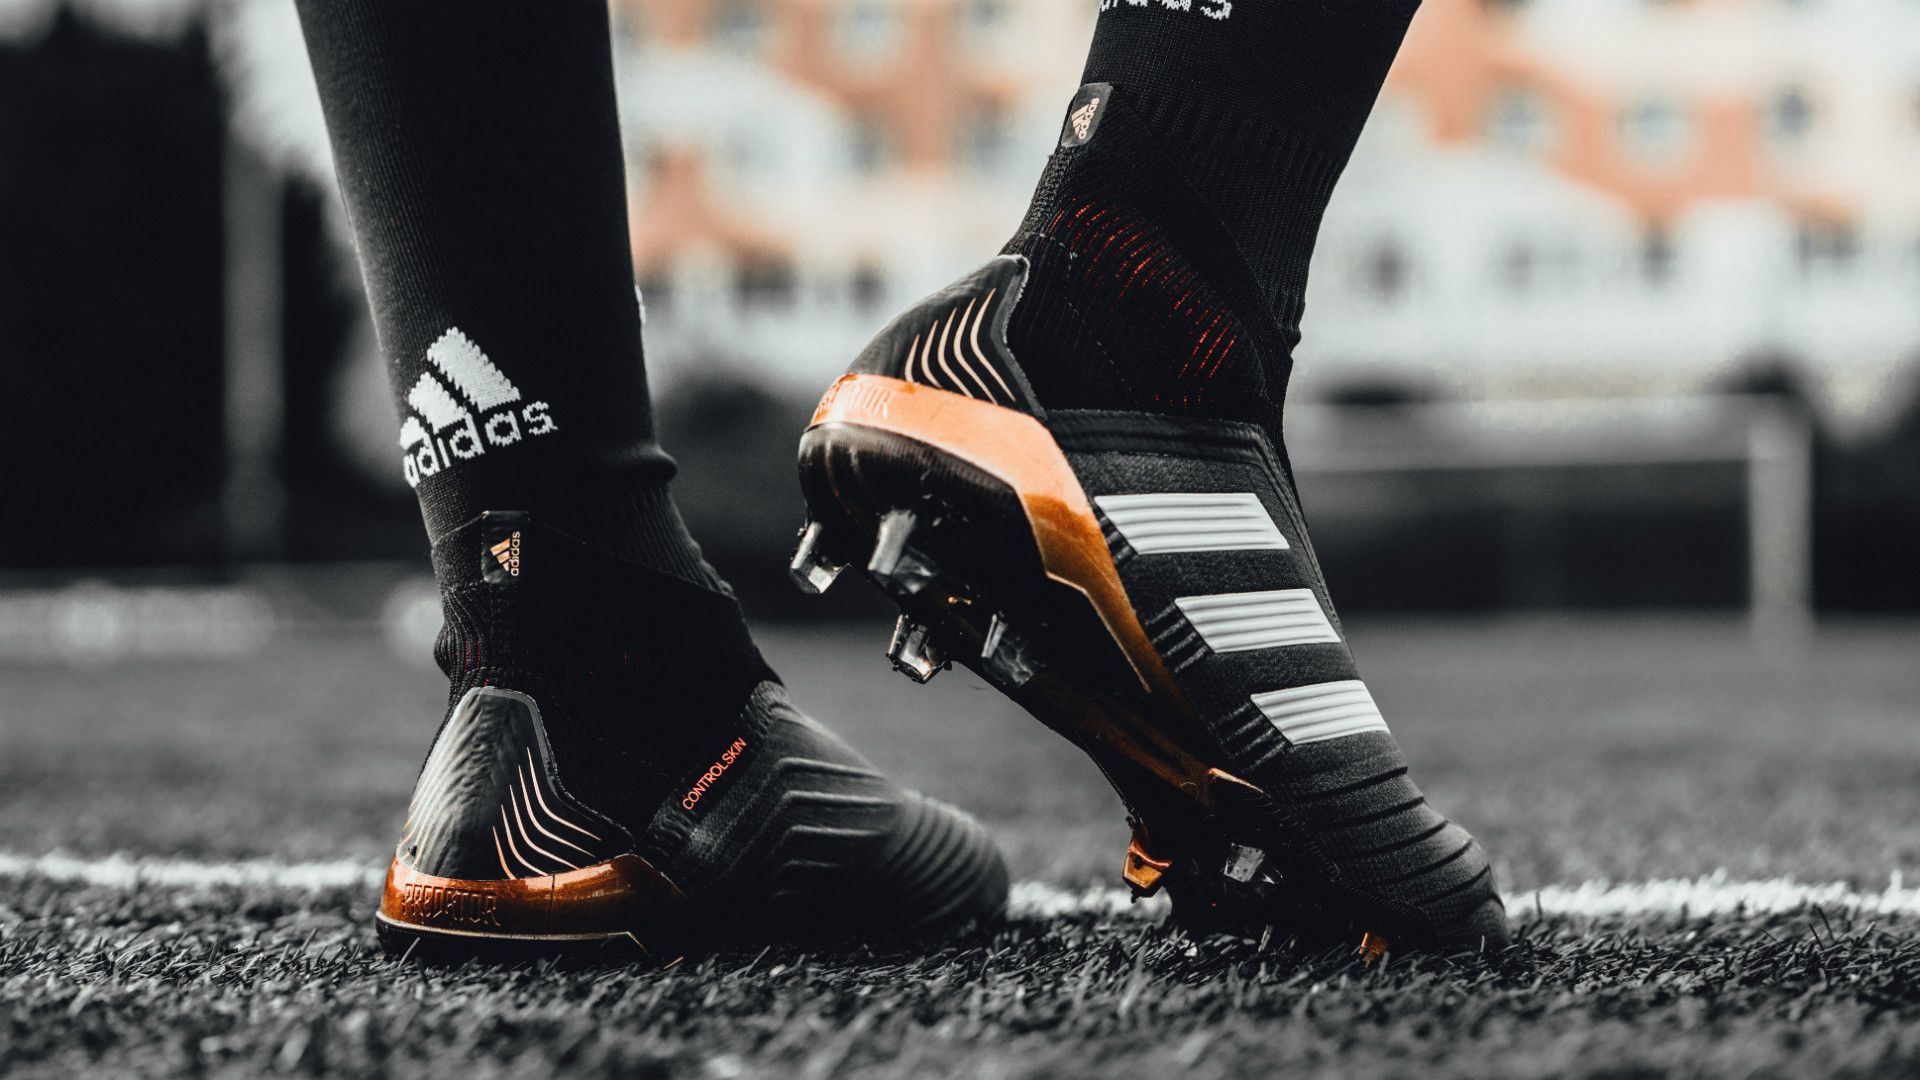 Adidas Predator 18+: Iconic boots re-launched for Pogba, Ozil ...